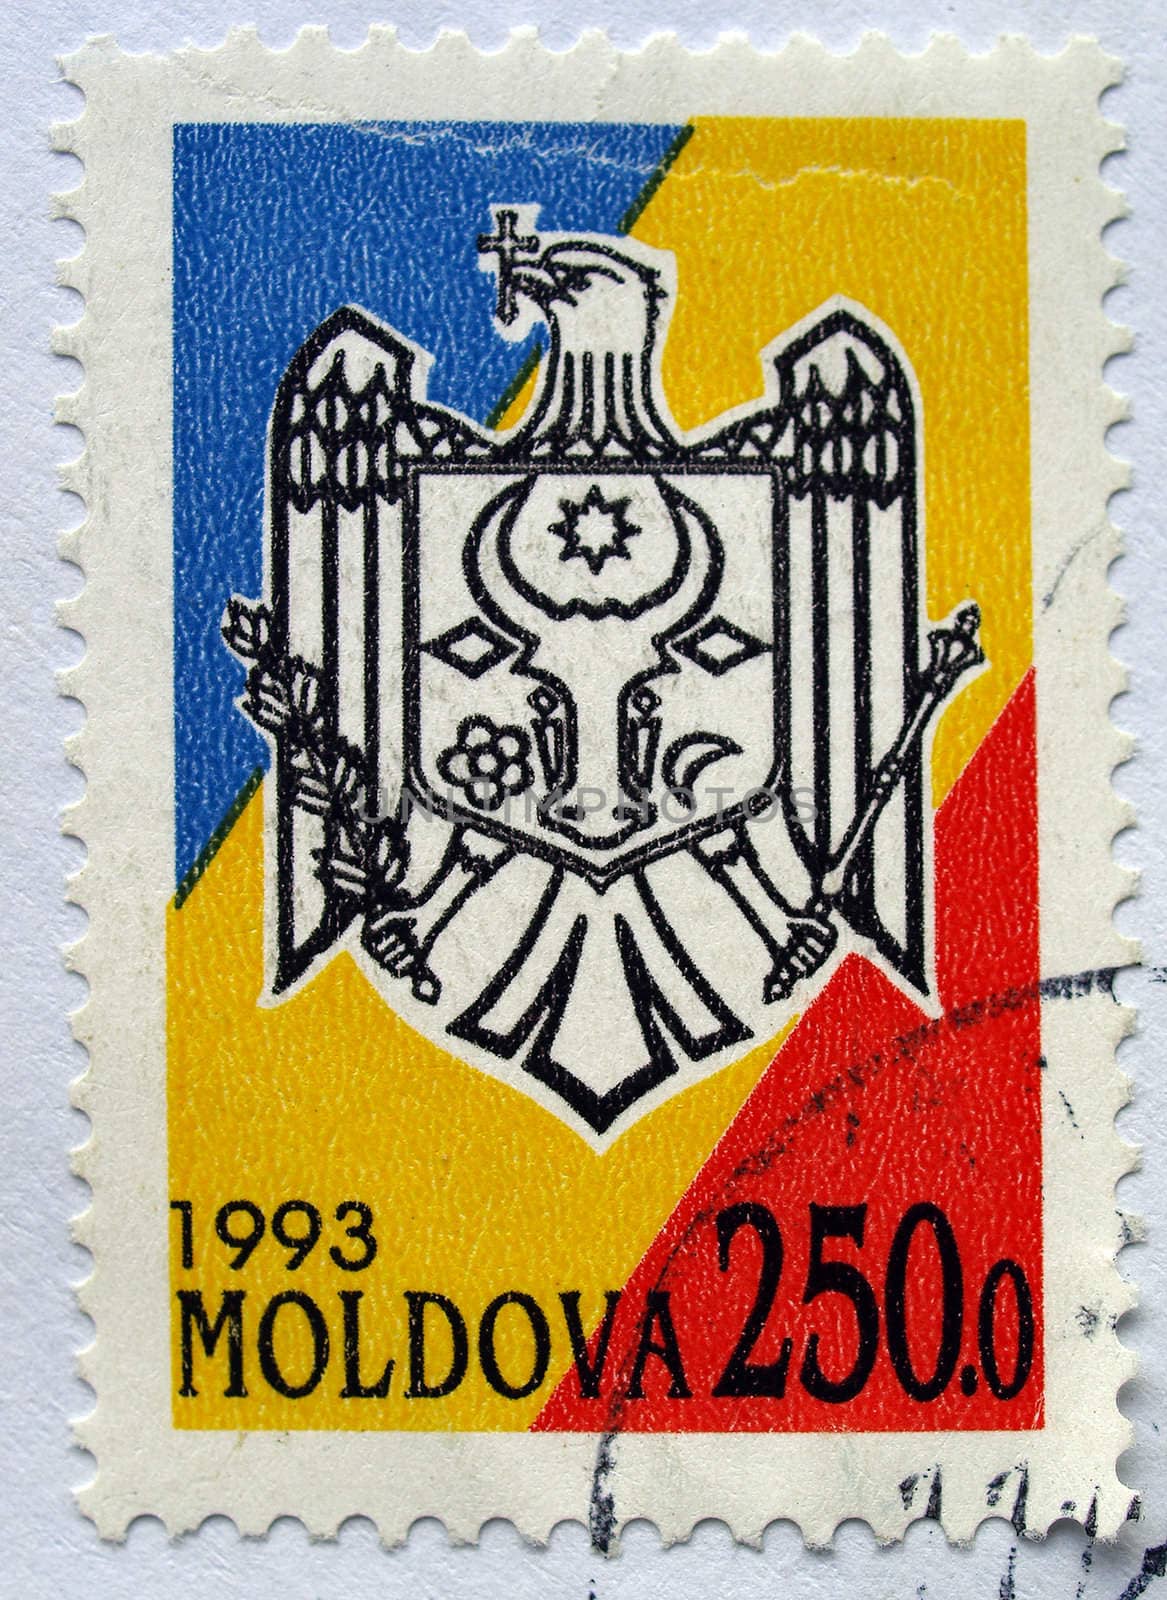 postage stamp from Moldova with postage meter